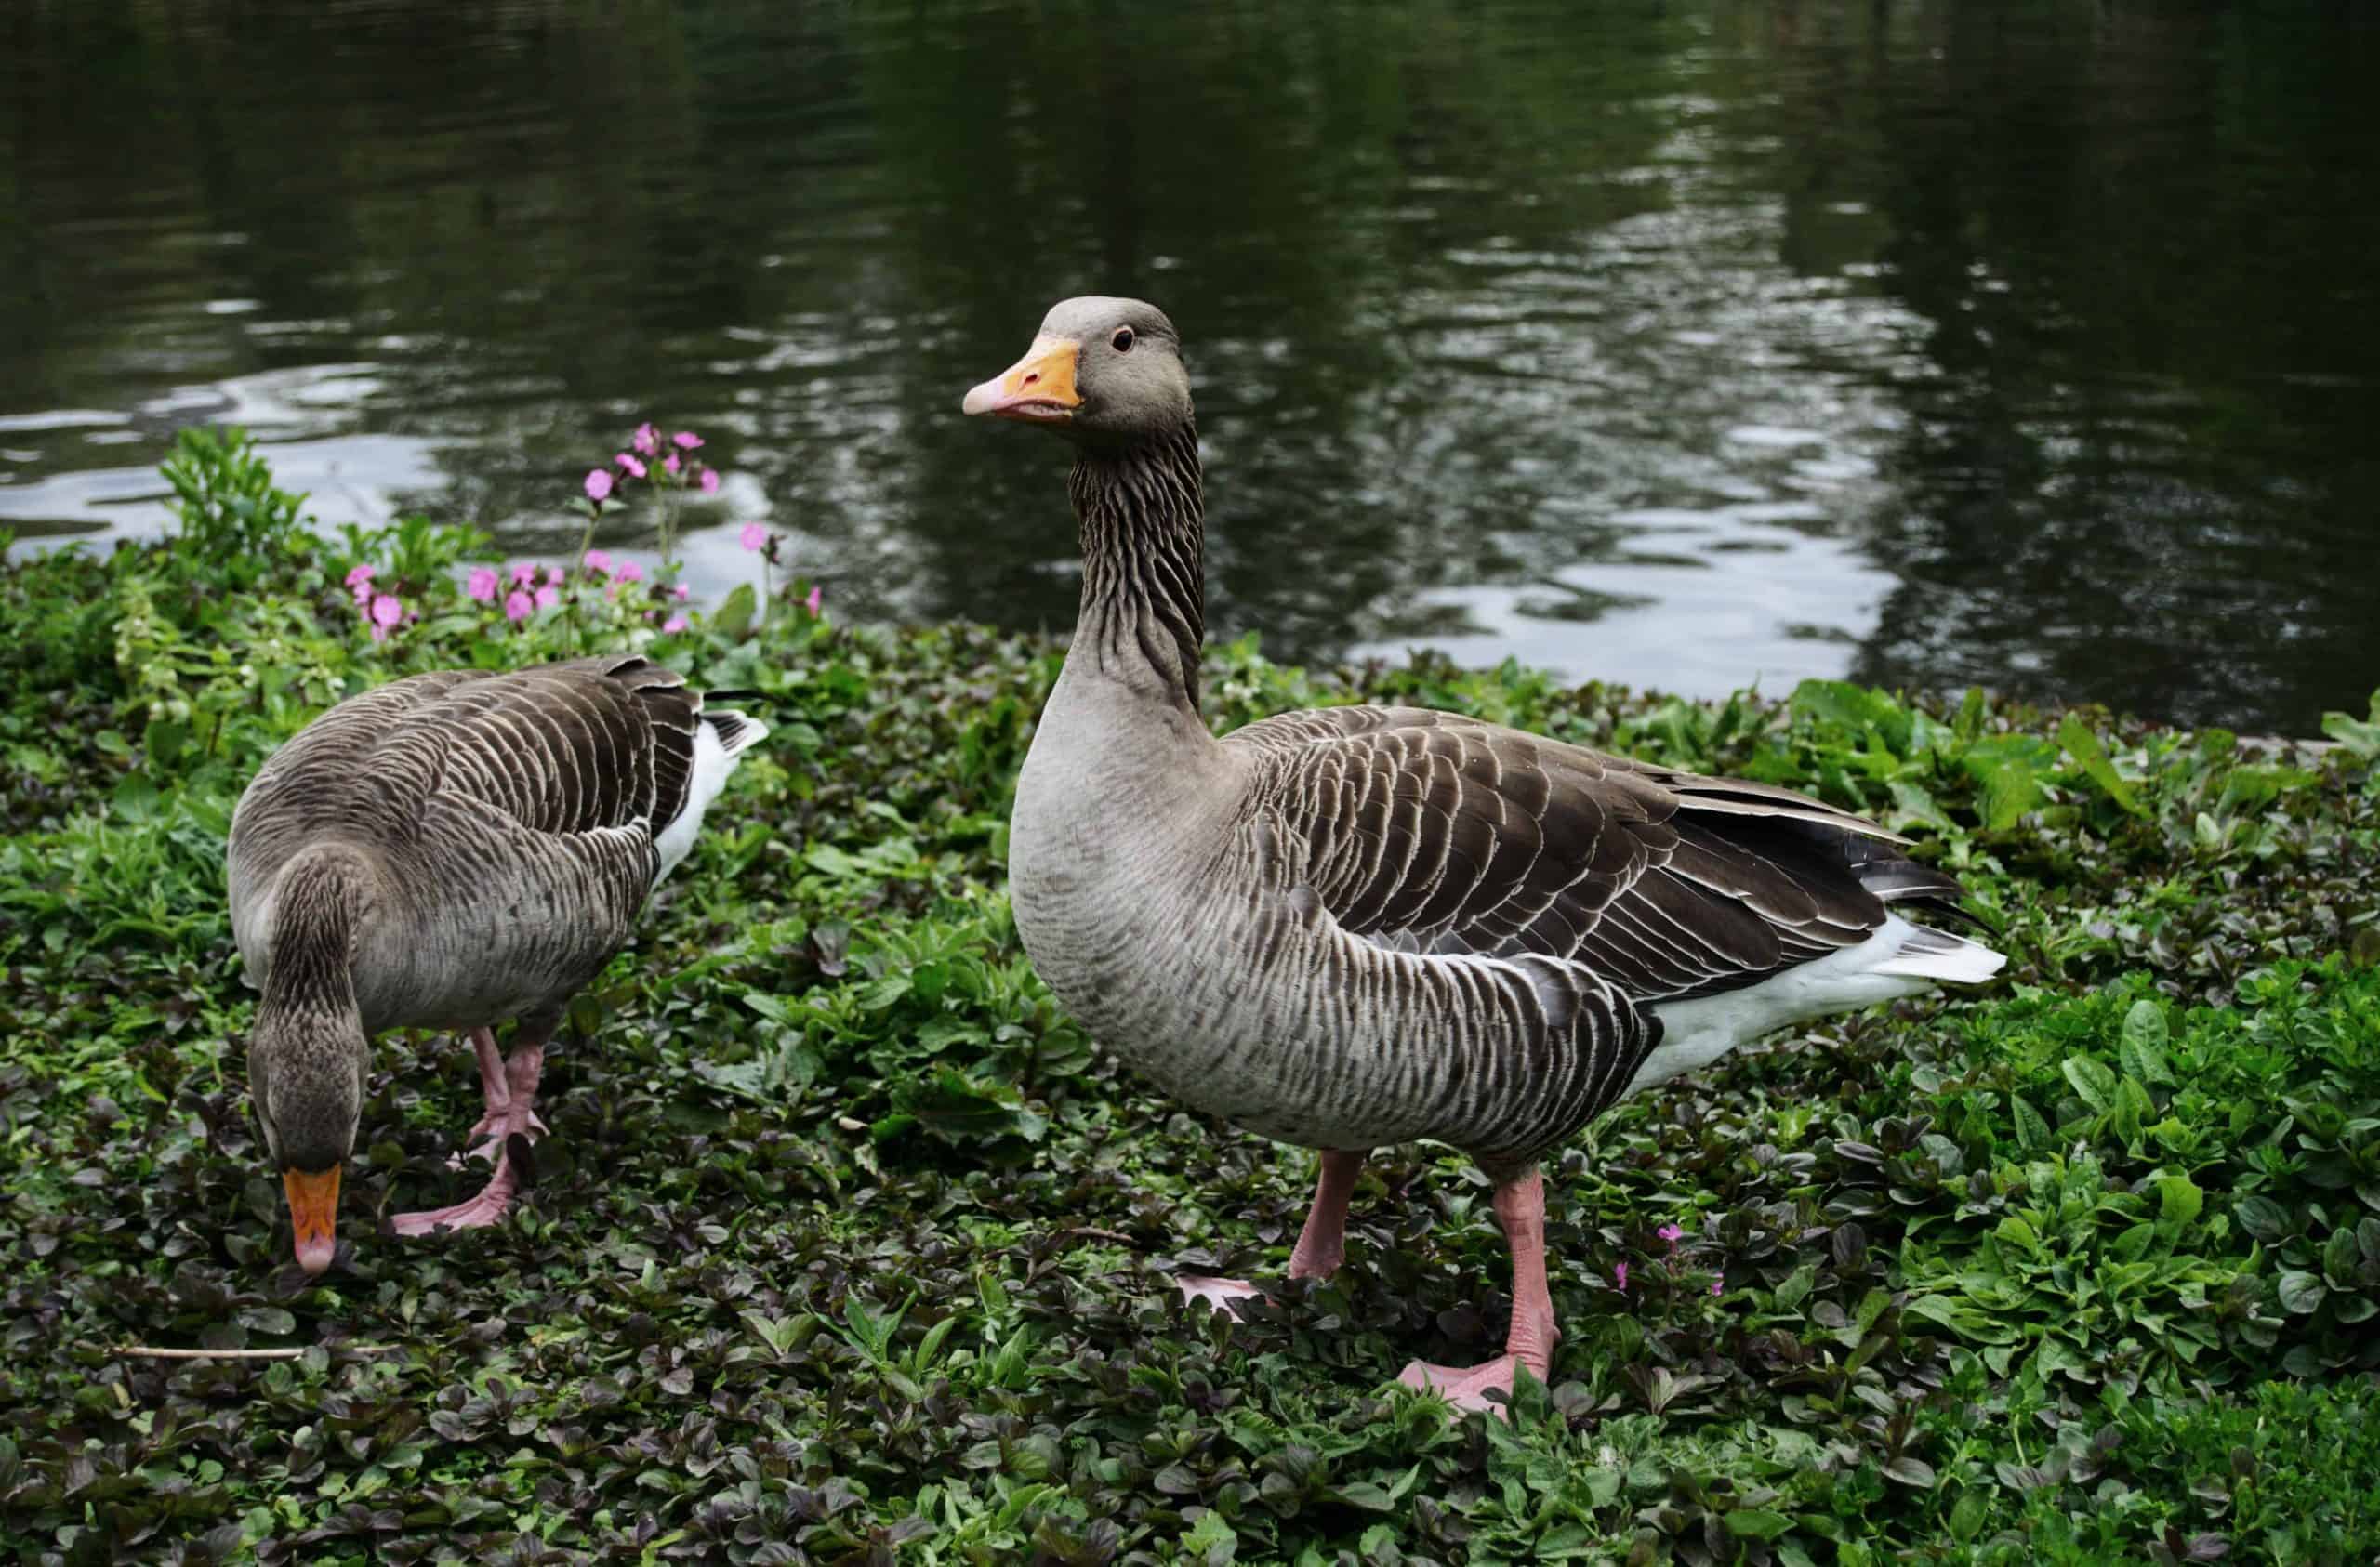 Two geese outside near a body of water. One is eating plants.